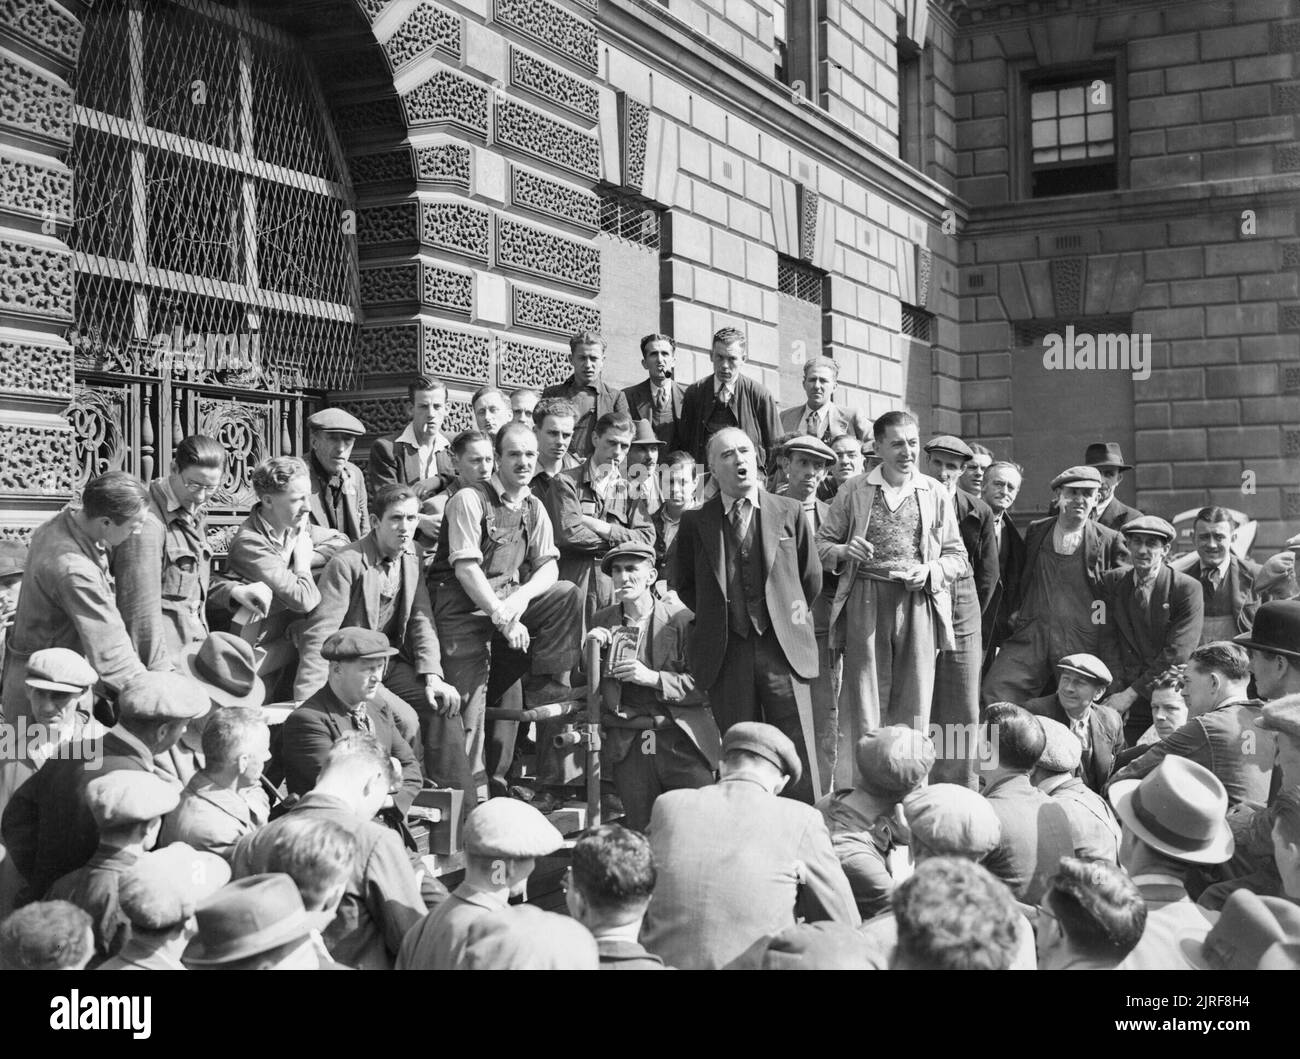 Harry Pollitt, General Secretary of the Communist Party of Great Britain, gives a speech to workers in Whitehall, London, 1941. Harry Pollitt, General Secretary of the Communist Party of Great Britain, gives a speech to workers in Whitehall, London, 1941. Stock Photo